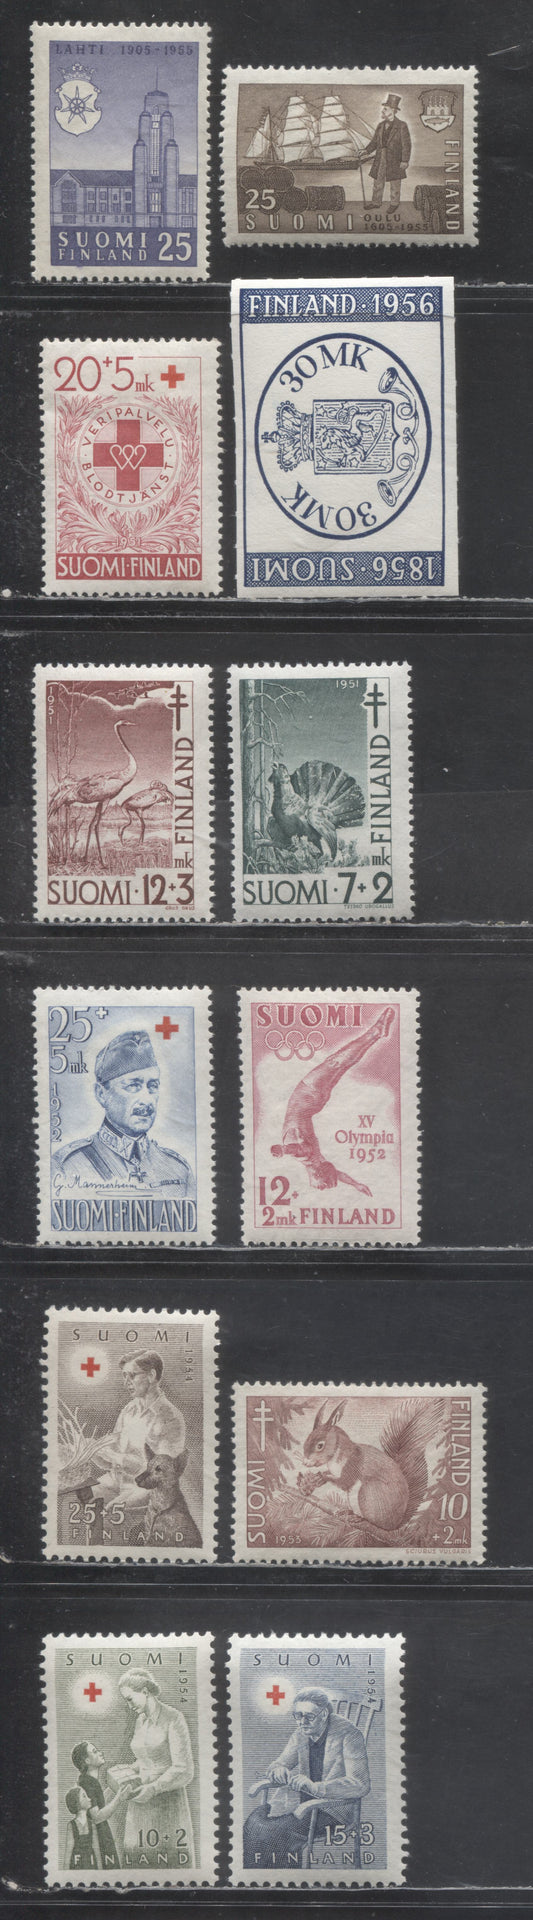 Lot 417 Finland SC#330/B125 1954-1955 300th Anniversary Oulu - Semi Postals, 12 VFOG Singles, Click on Listing to See ALL Pictures, Estimated Value $15